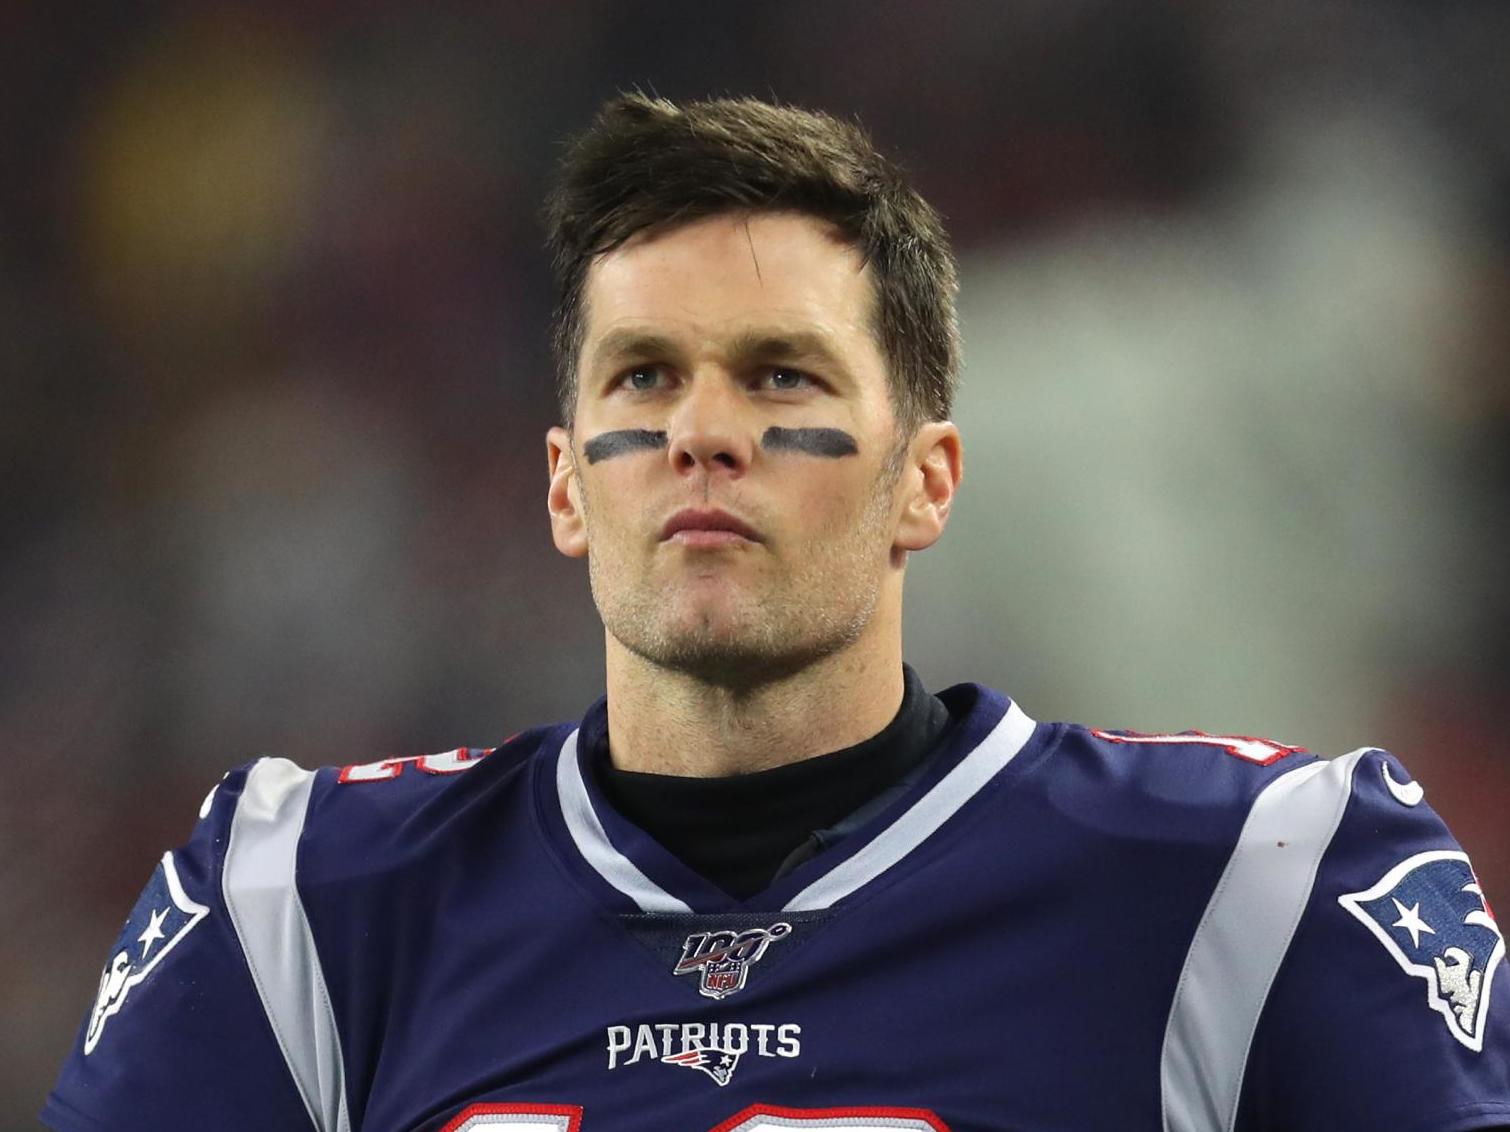 Tom Brady to leave New England Patriots after 20 years | The ...